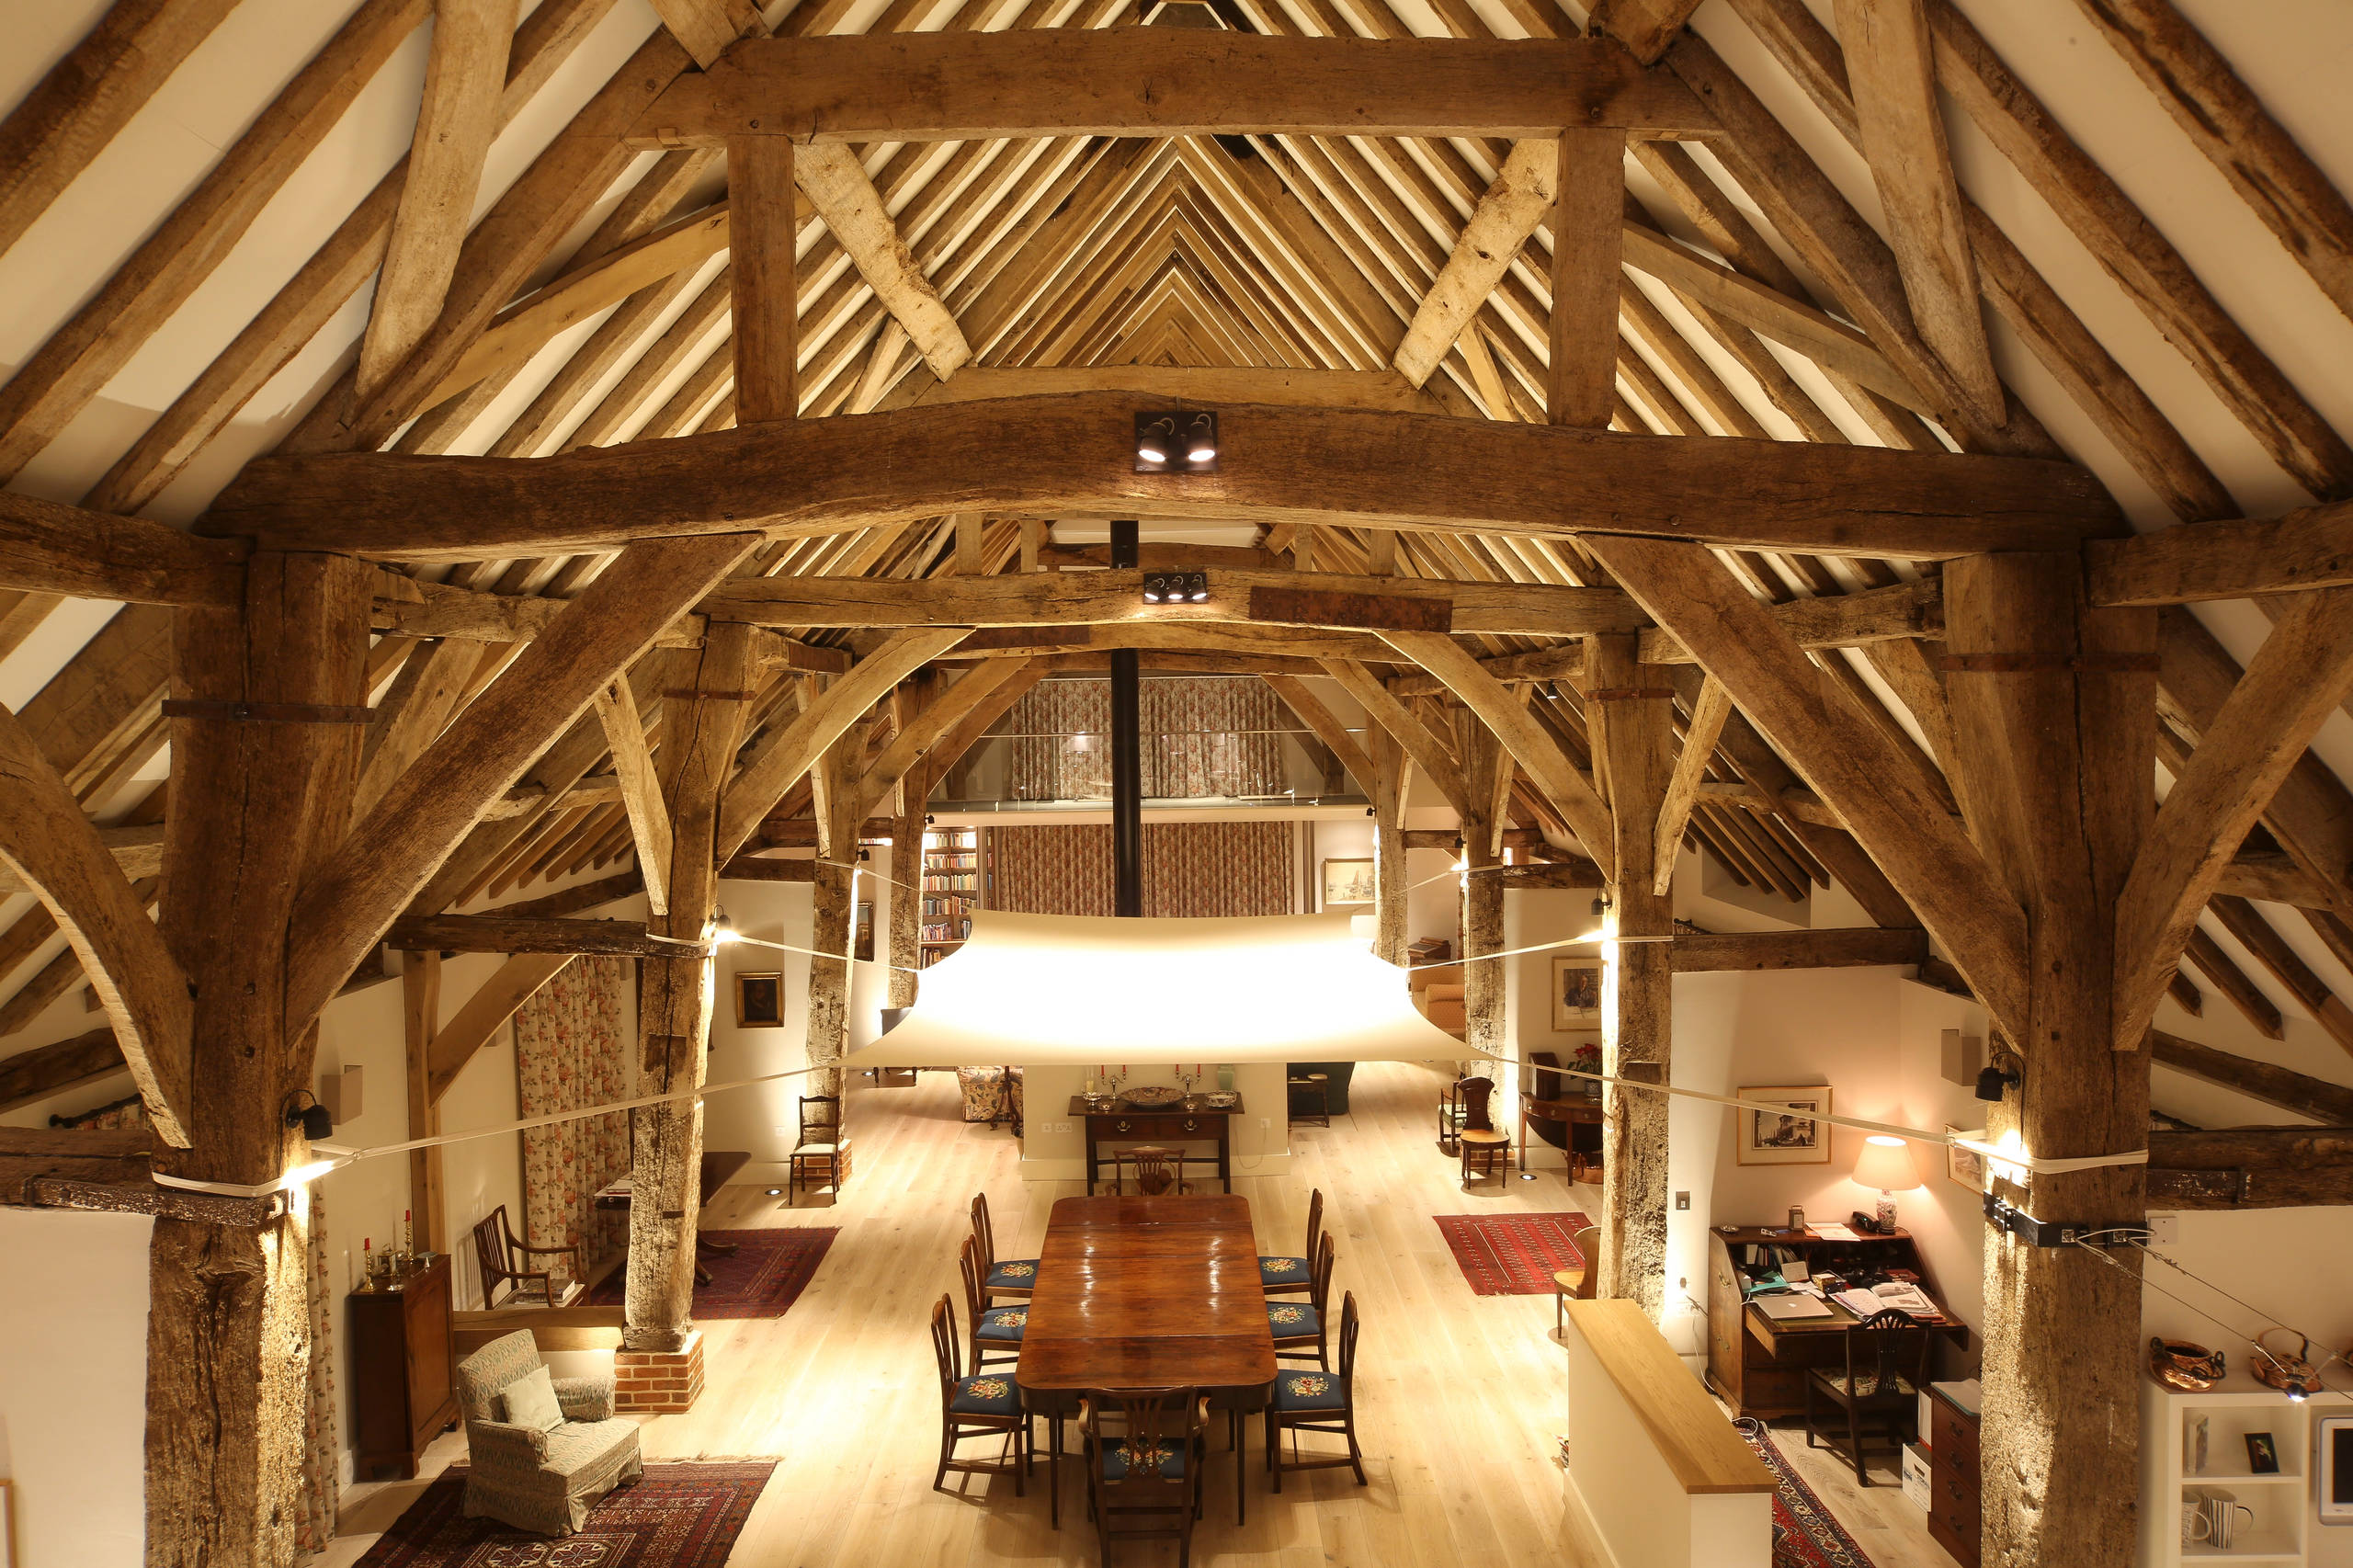 How to Light Up Wooden Beams and Barn-style Ceilings | Houzz UK